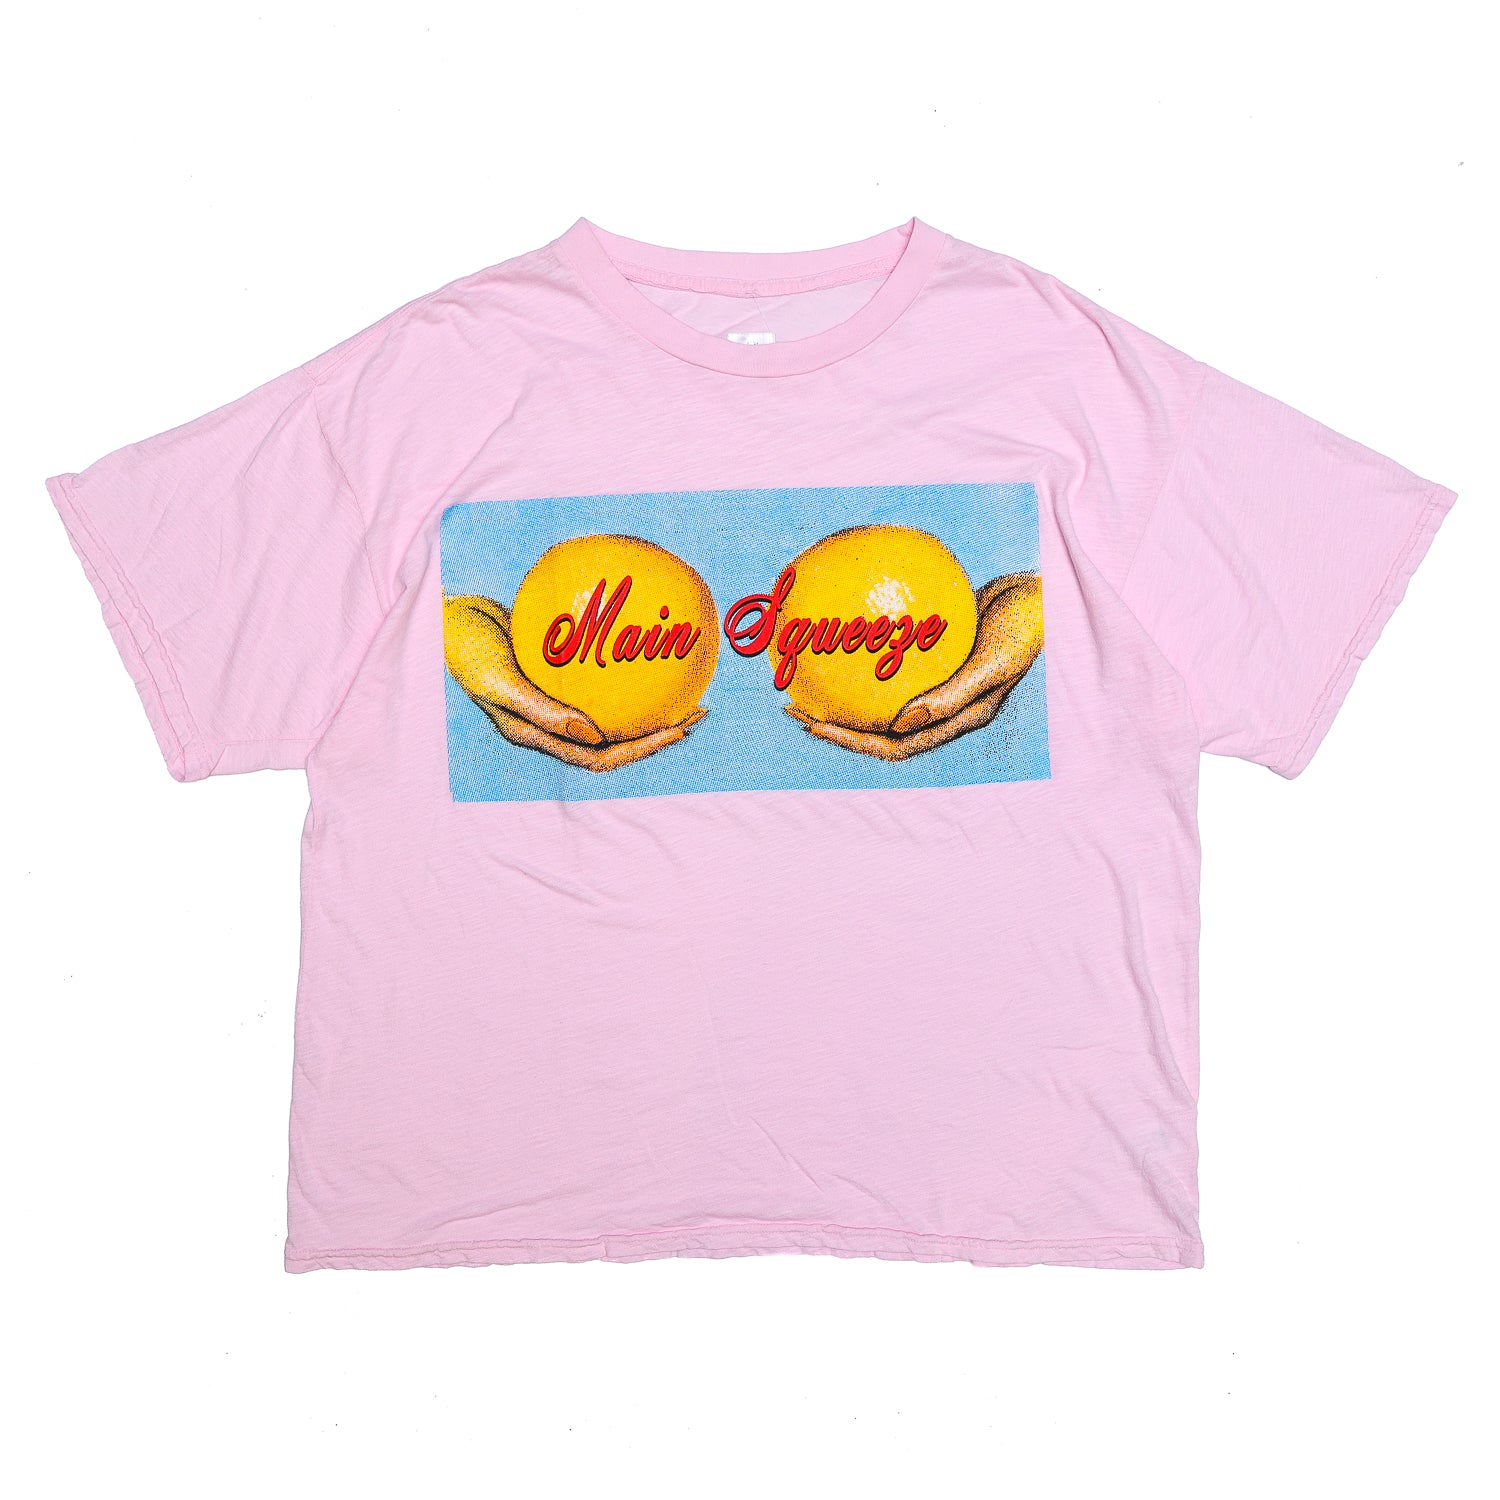 Boys Lie Main Squeeze BF Tee 'Pink'